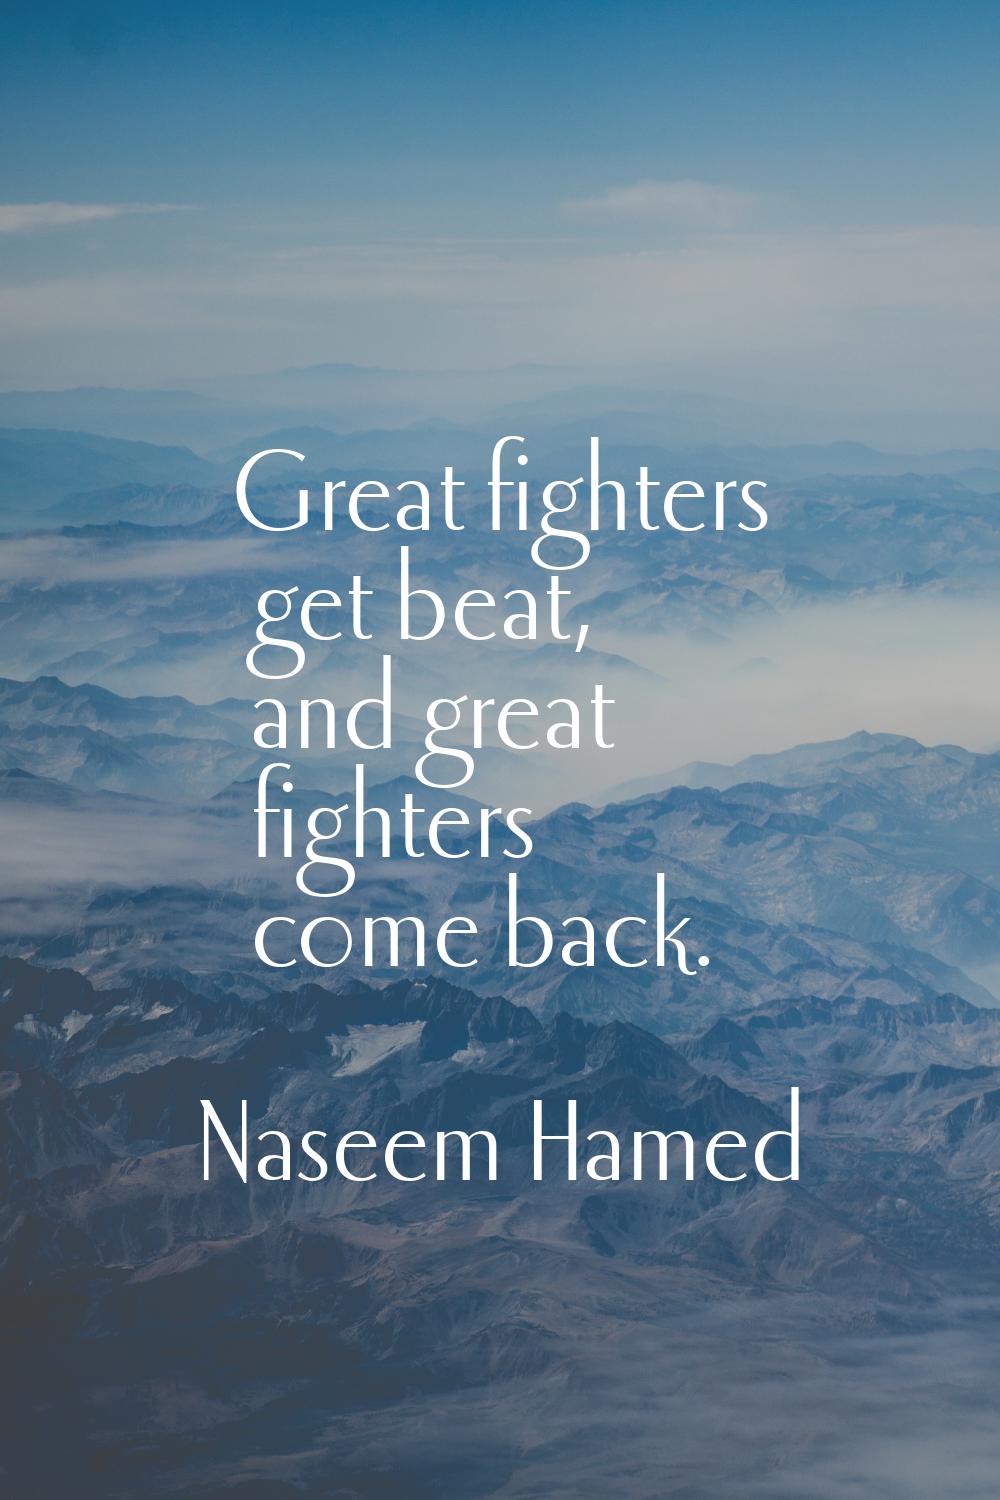 Great fighters get beat, and great fighters come back.